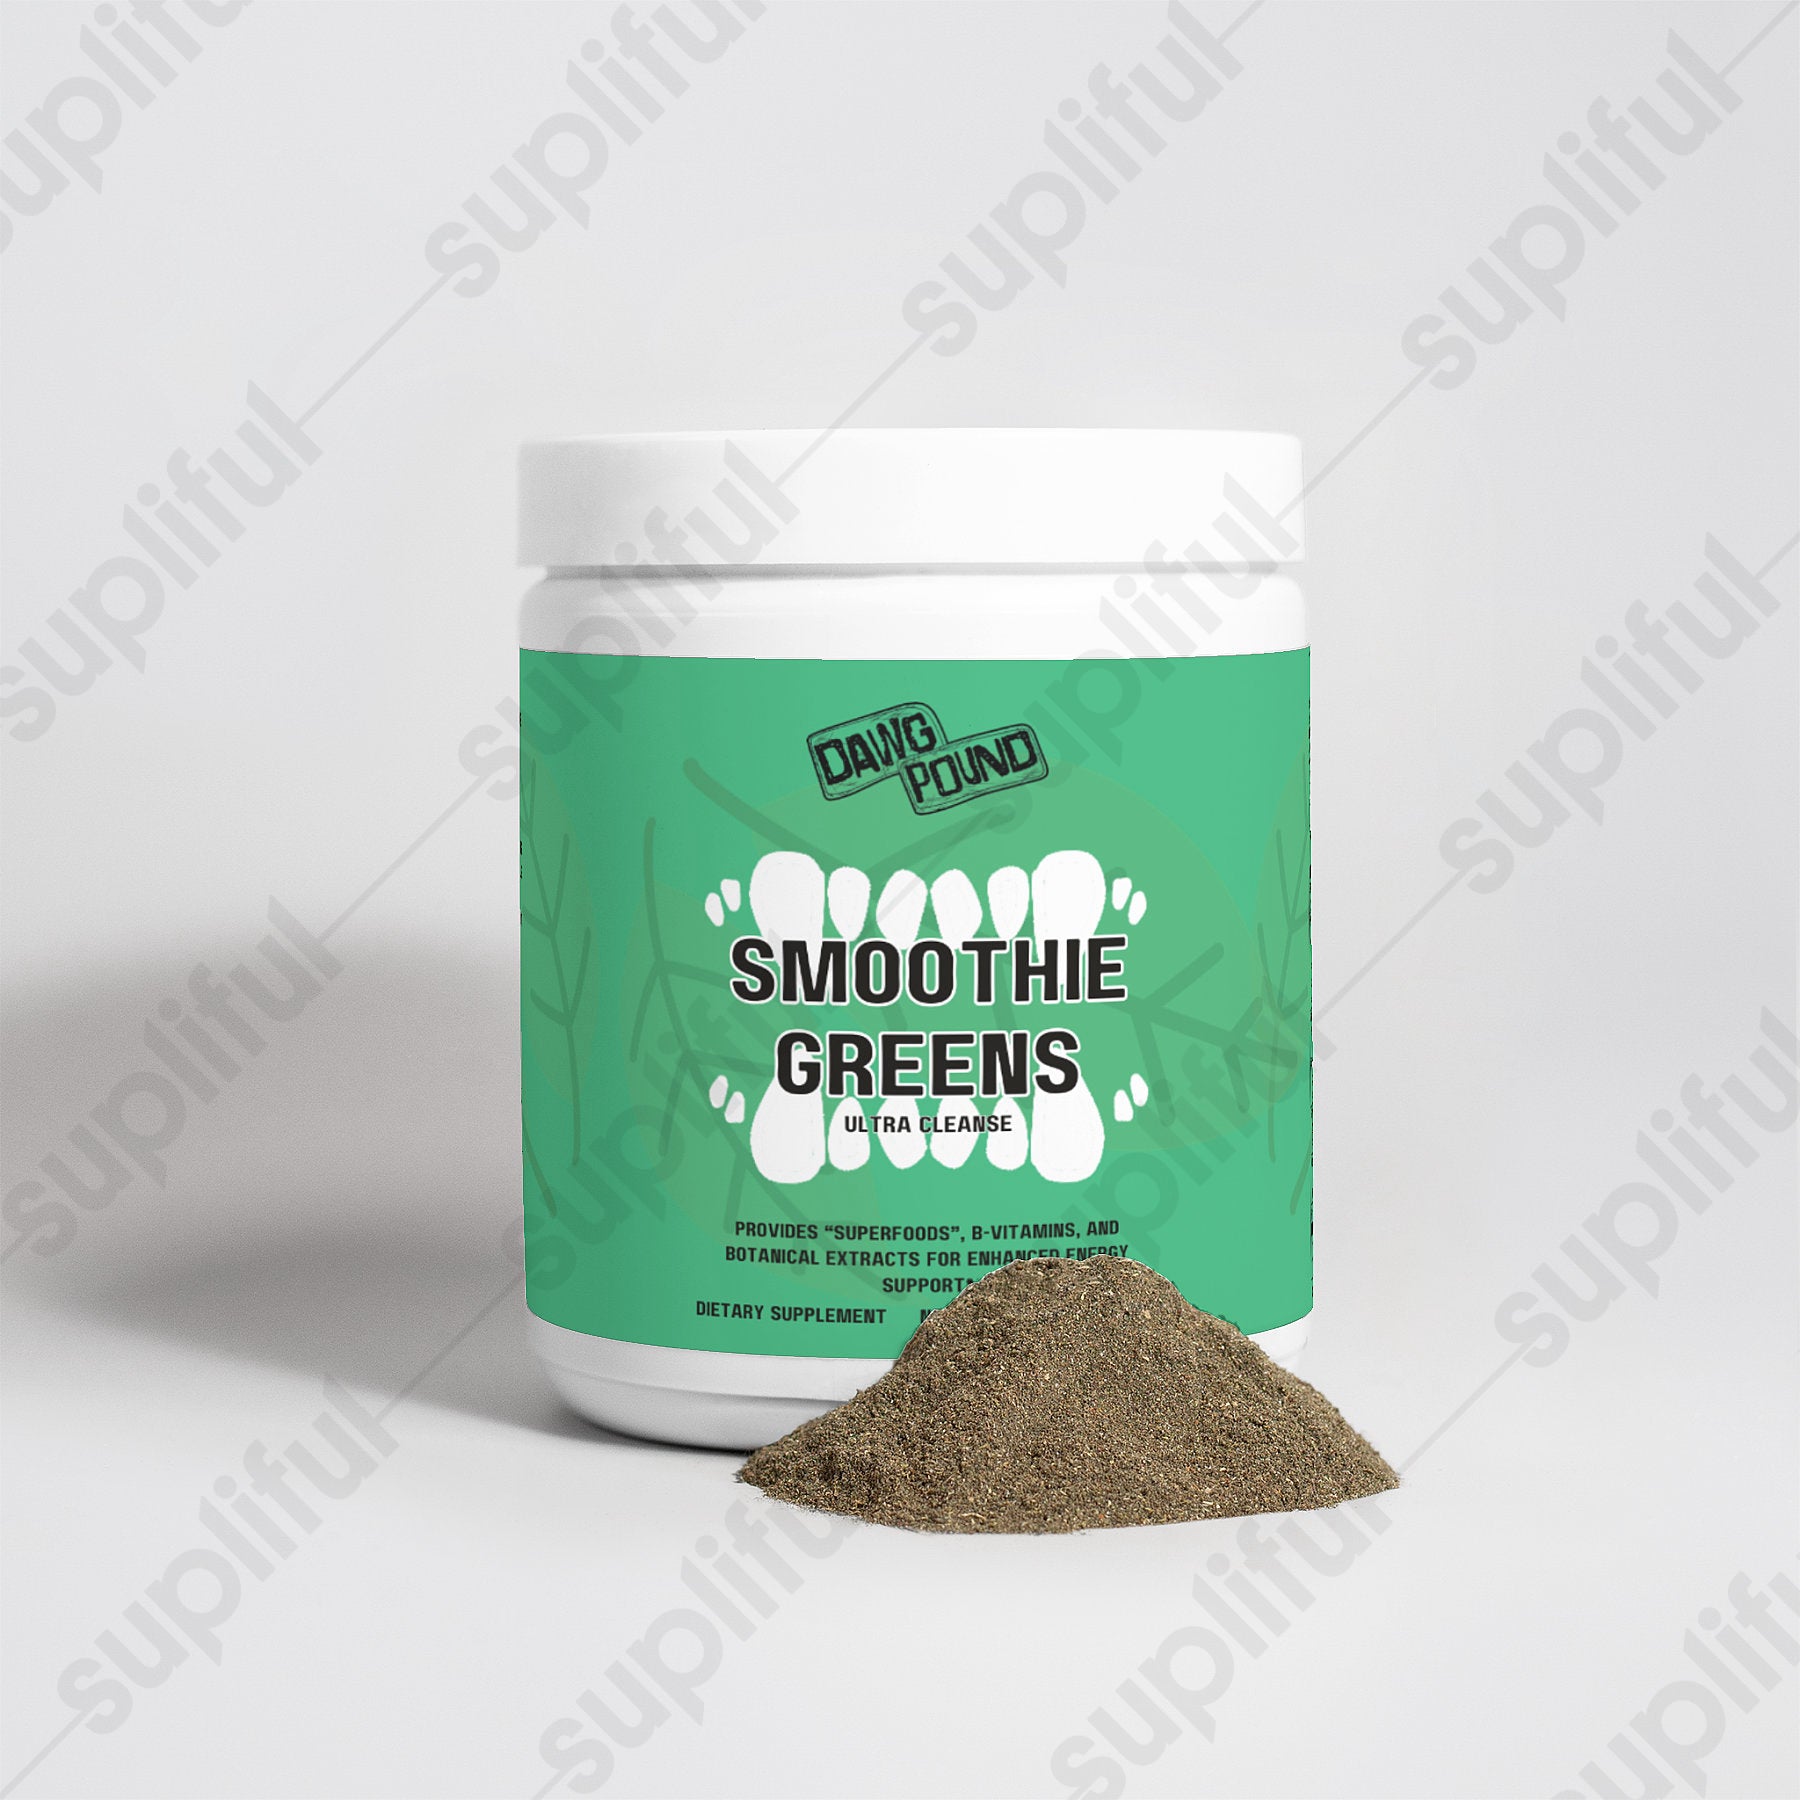 Dawg Pound Ultra Cleanse Smoothie Greens Supplement with Product Powder Displayed in Front